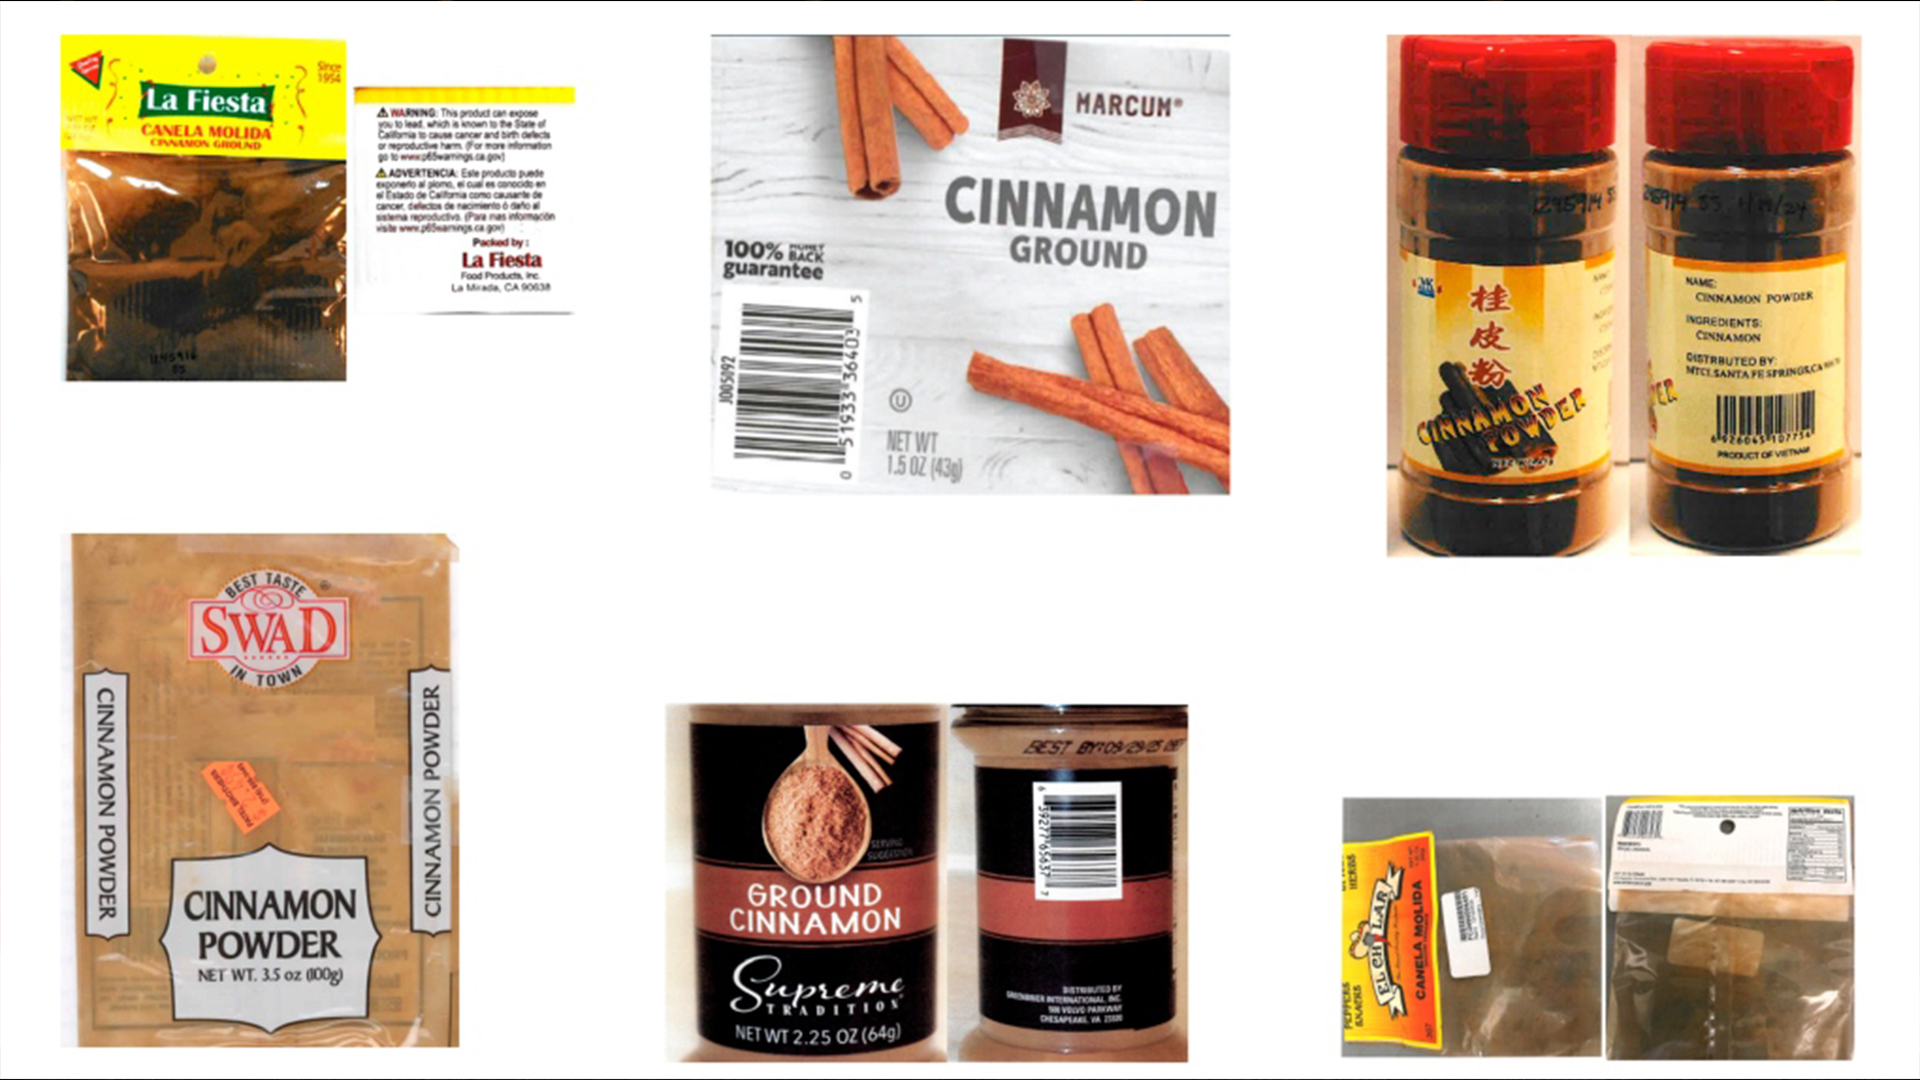 Ground cinnamon recalls in the United States: What you need to know